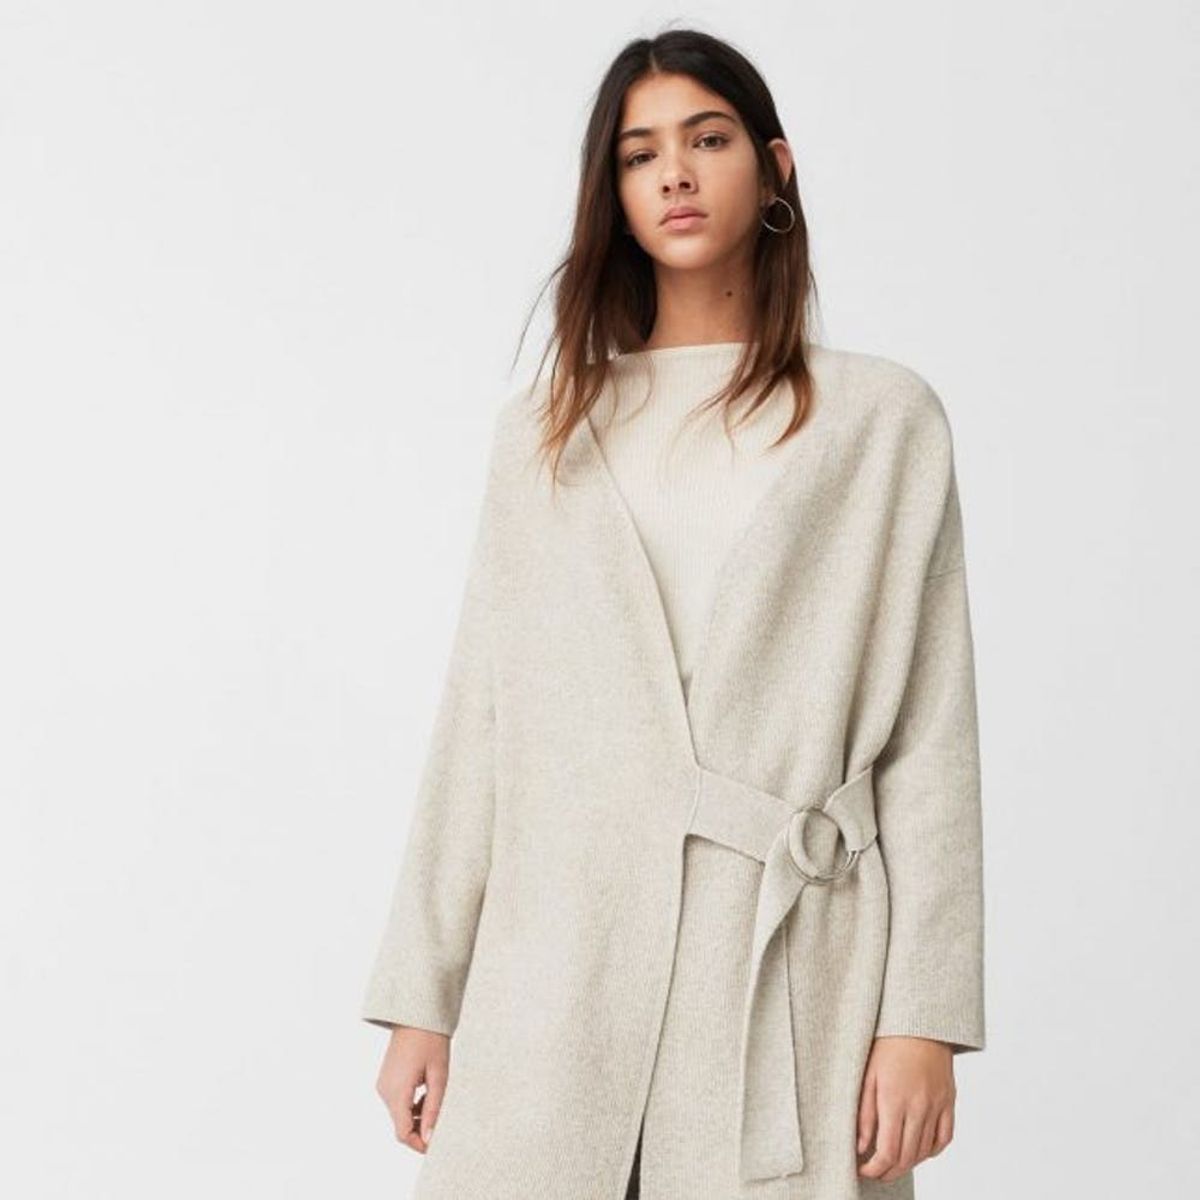 14 Ways to Infuse Your #OOTD With Scandi Hygge Vibes